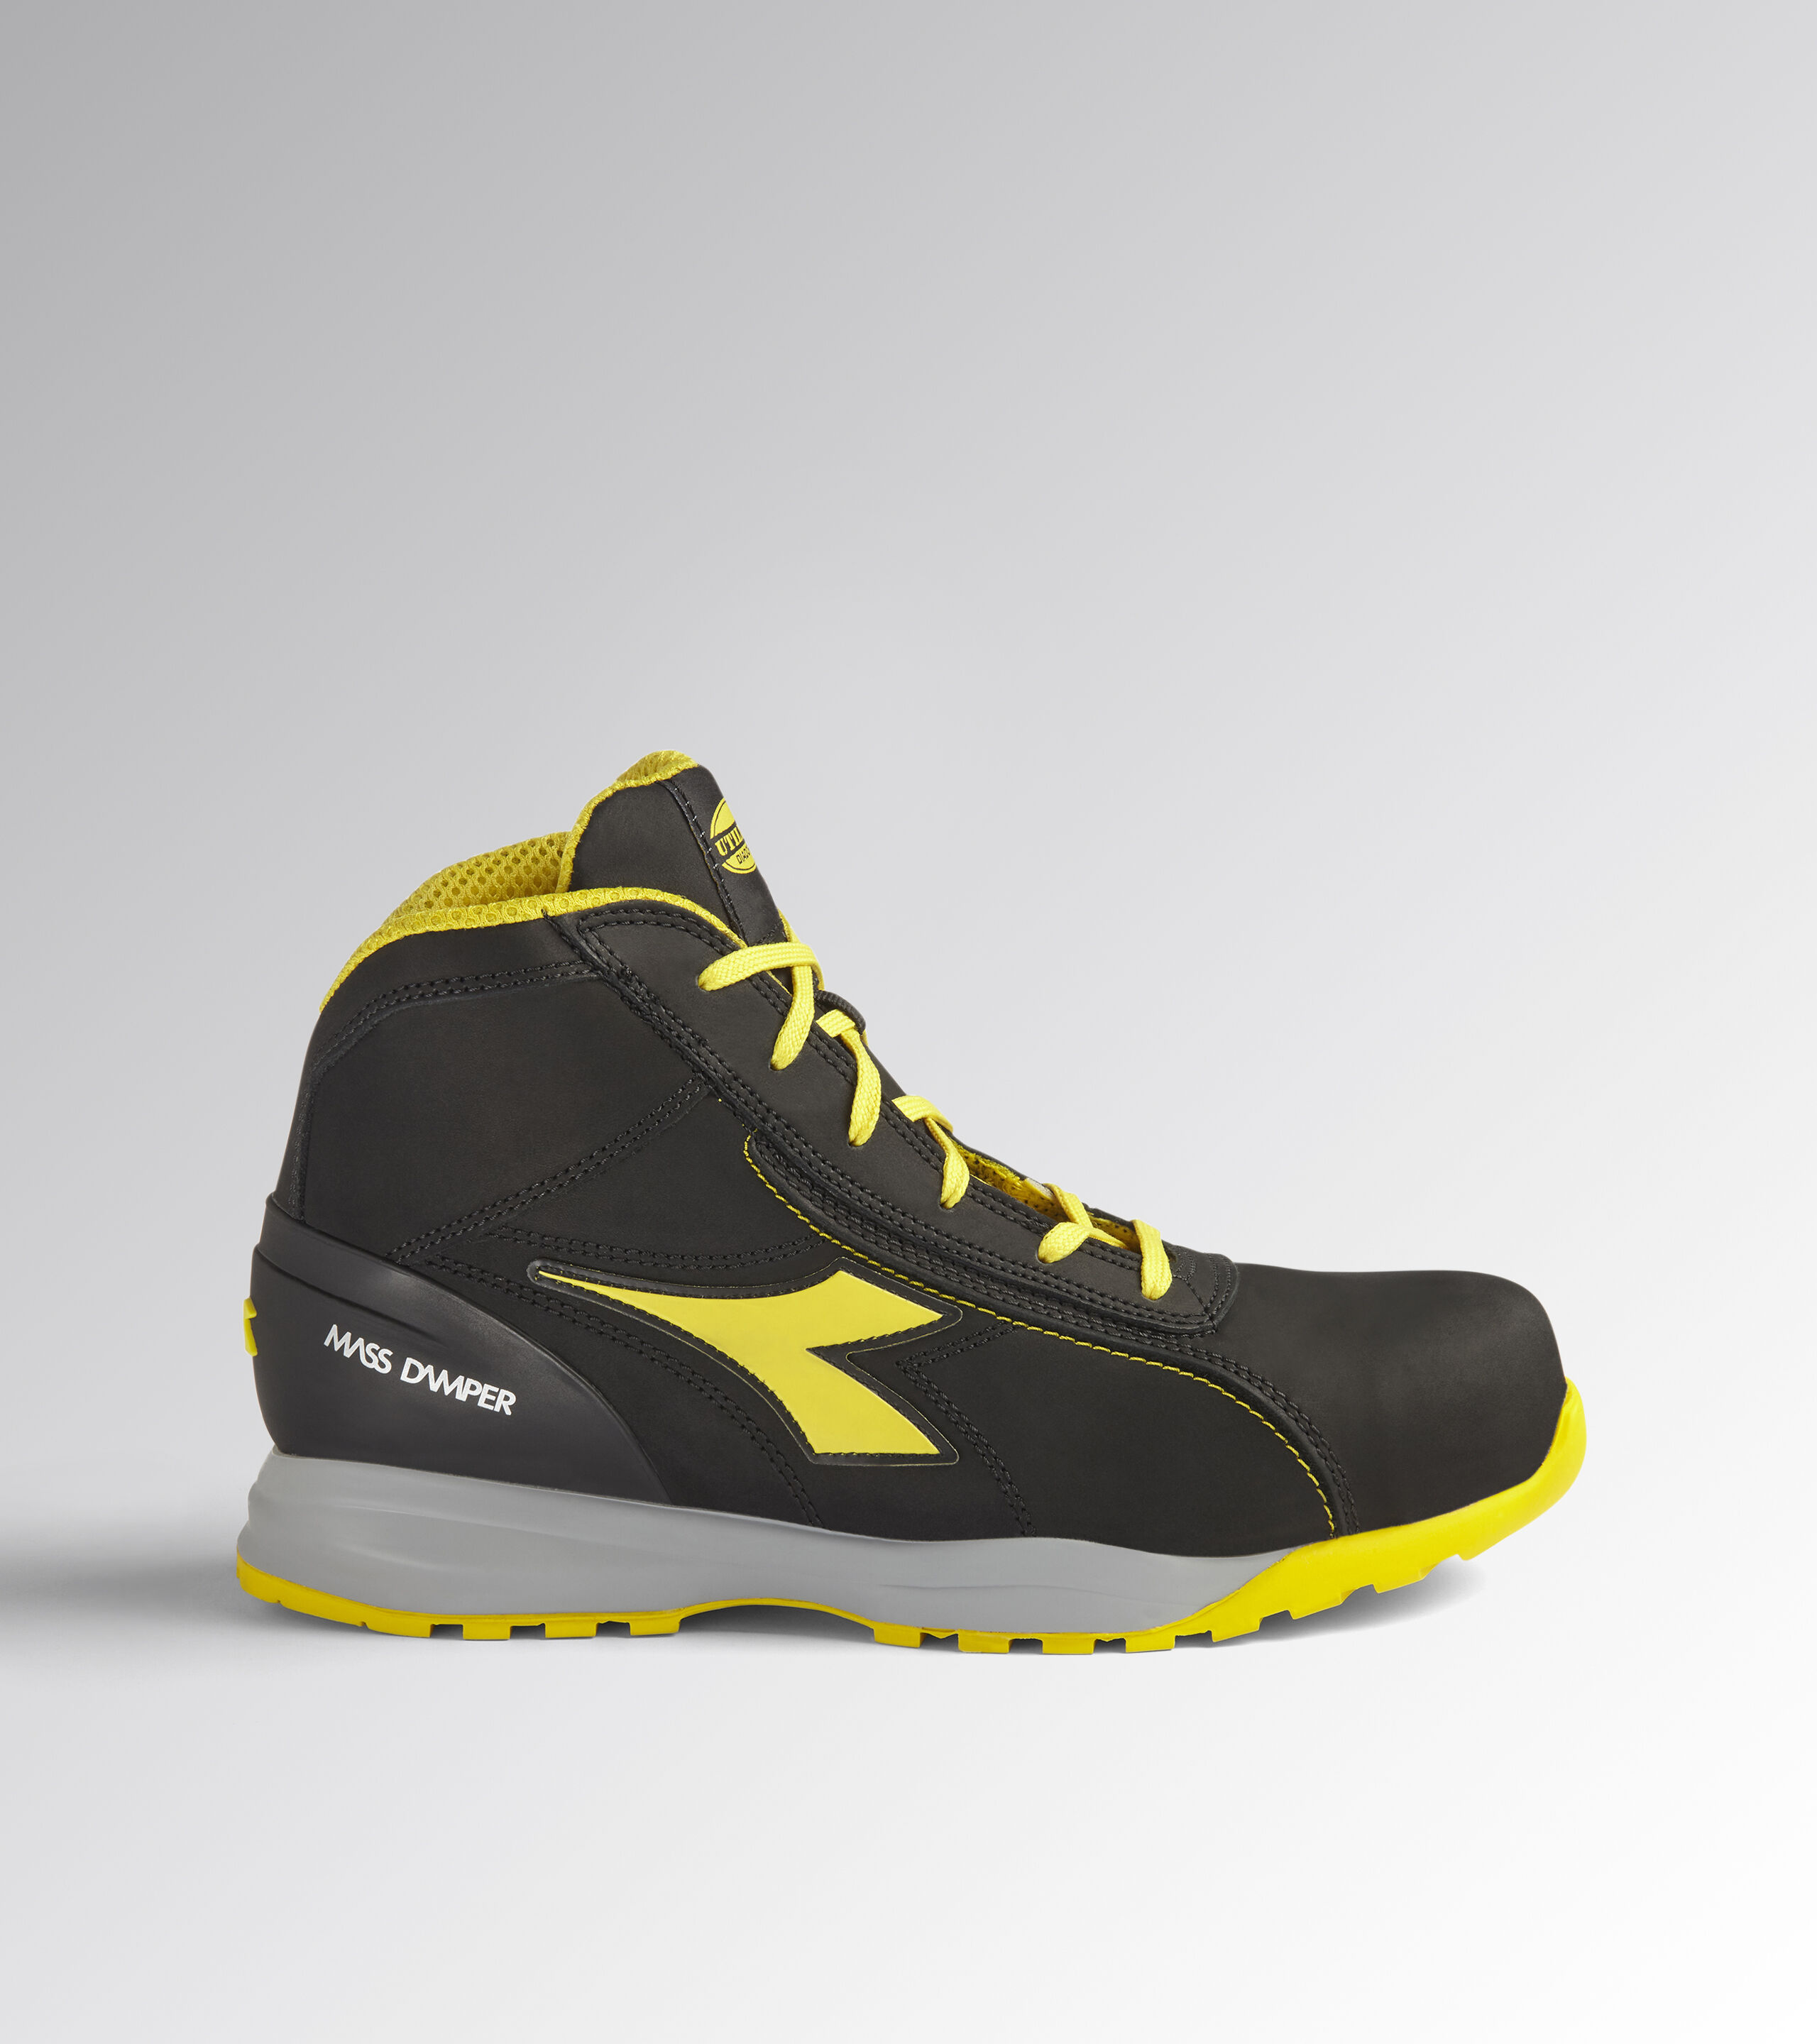 Work Boots & Safety Shoes for Winter - Diadora Utility Online Shop